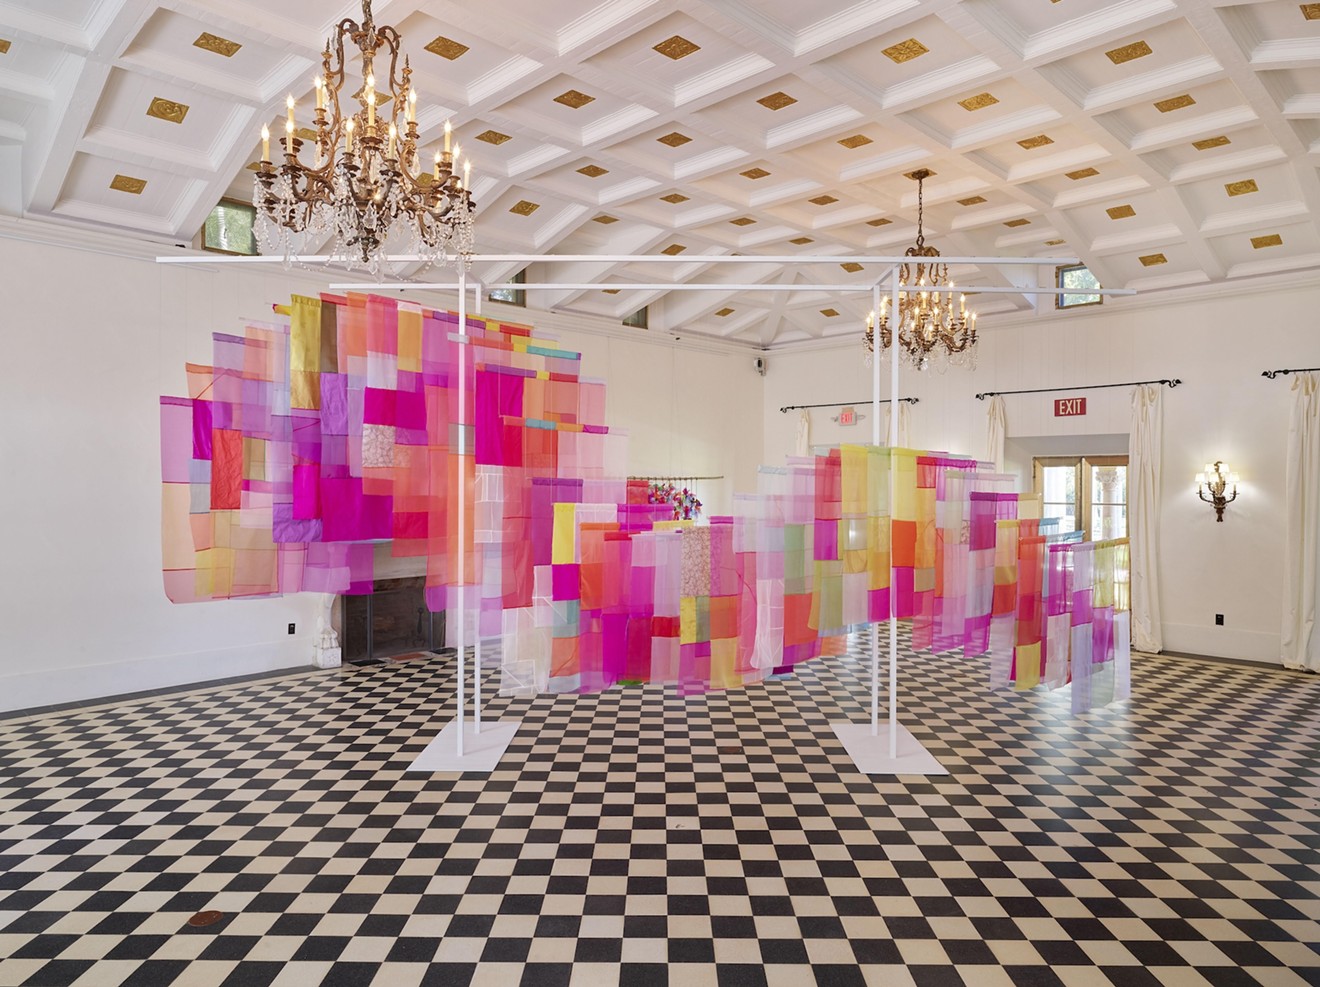 Yolanda Sánchez's work at the Deering Estate Great Hall Gallery is a poetic abstraction of vibrant colors in its surroundings.